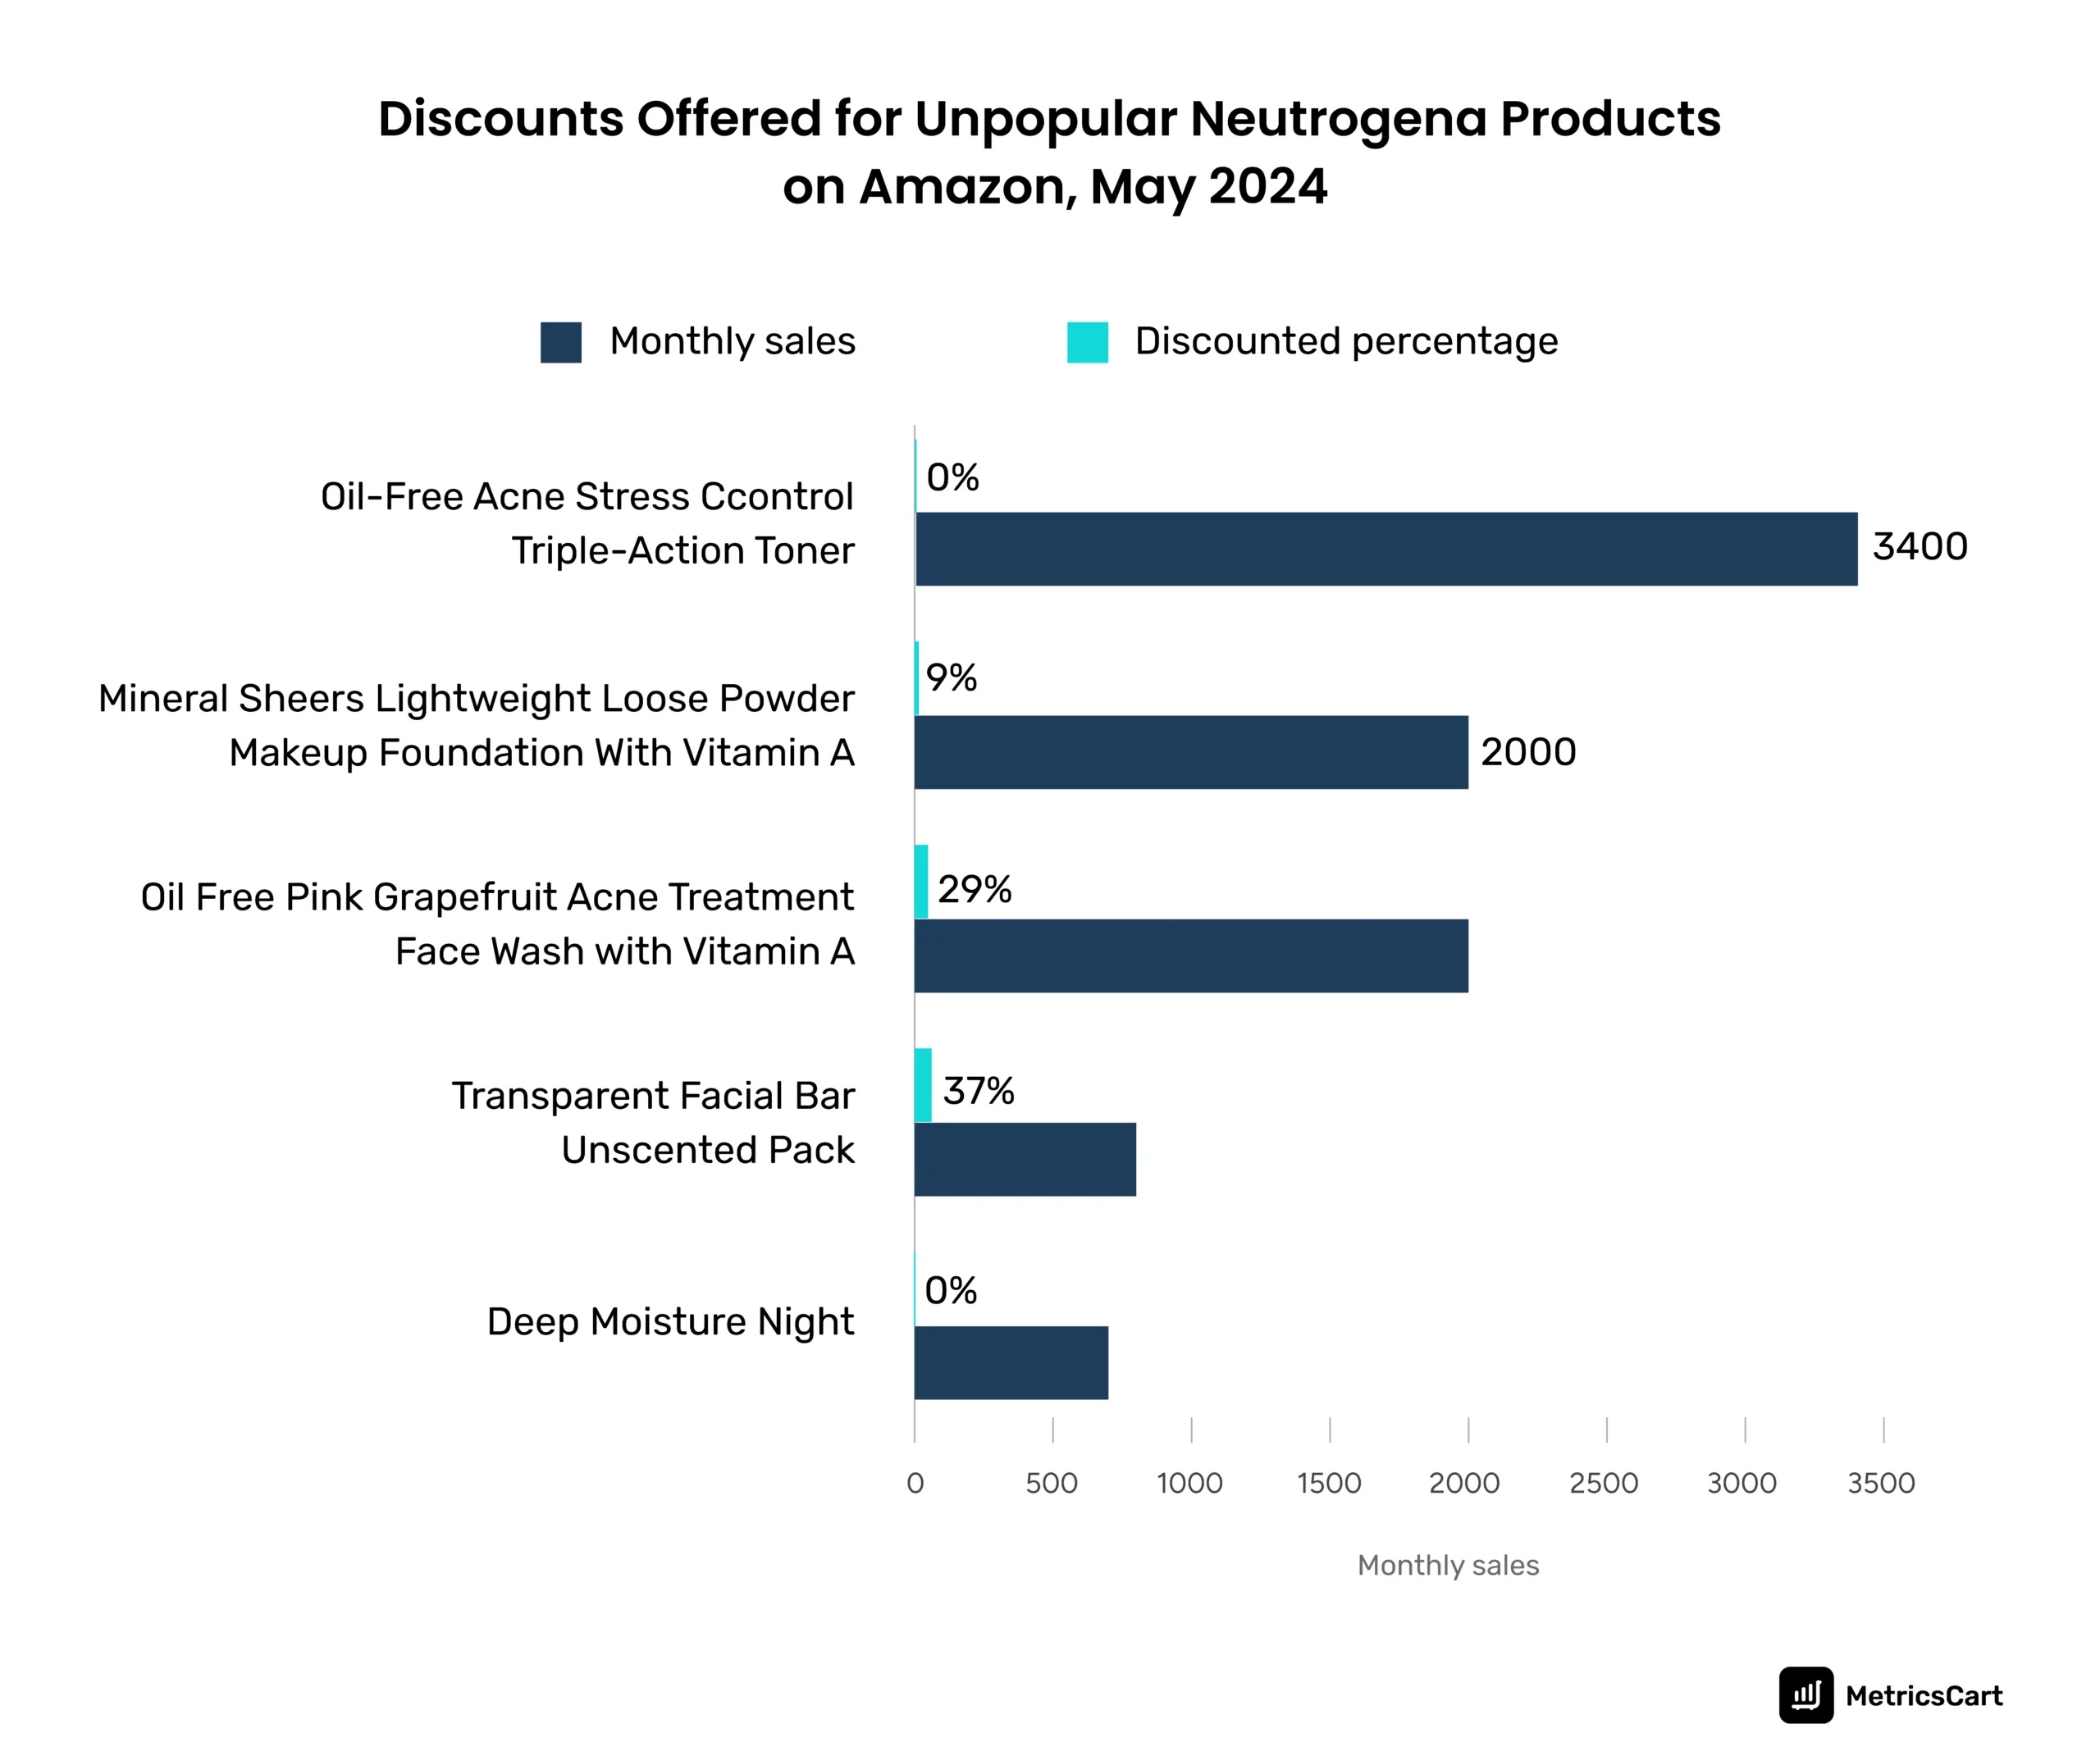 The highest discount for a Neutrogena product in this category.